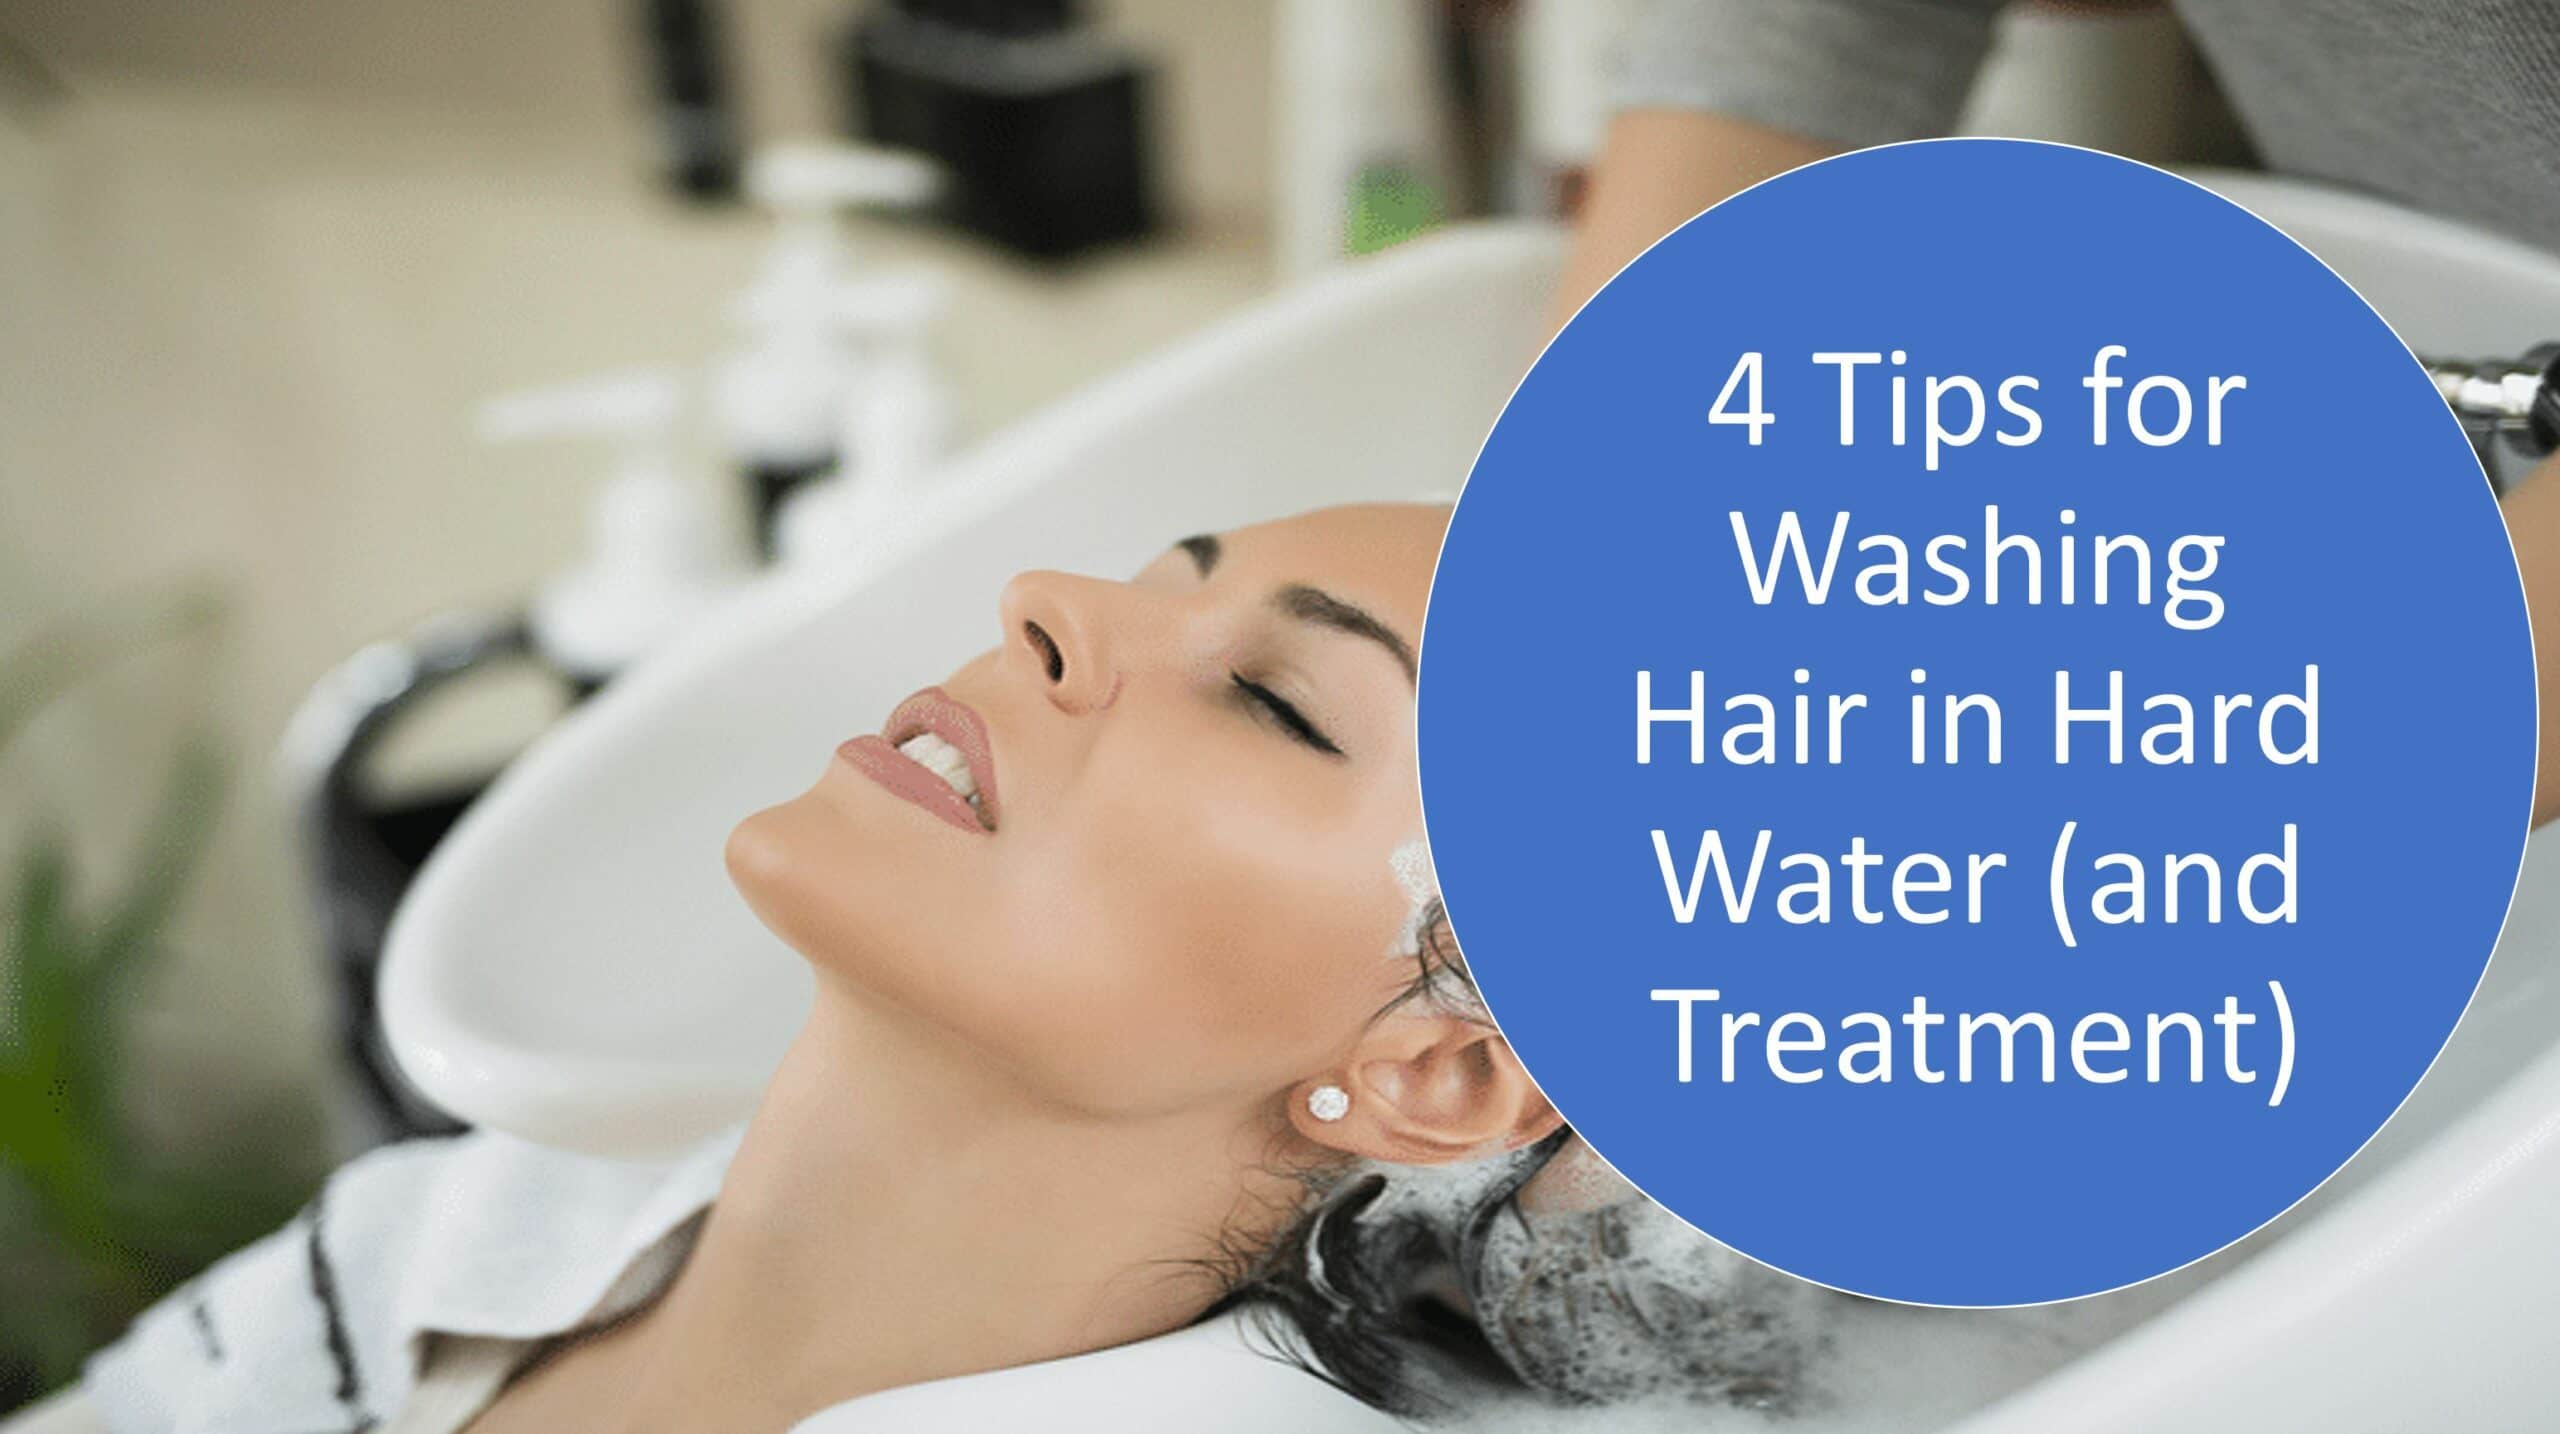 4 Tips for Washing Hair in Hard Water (And Treatment)